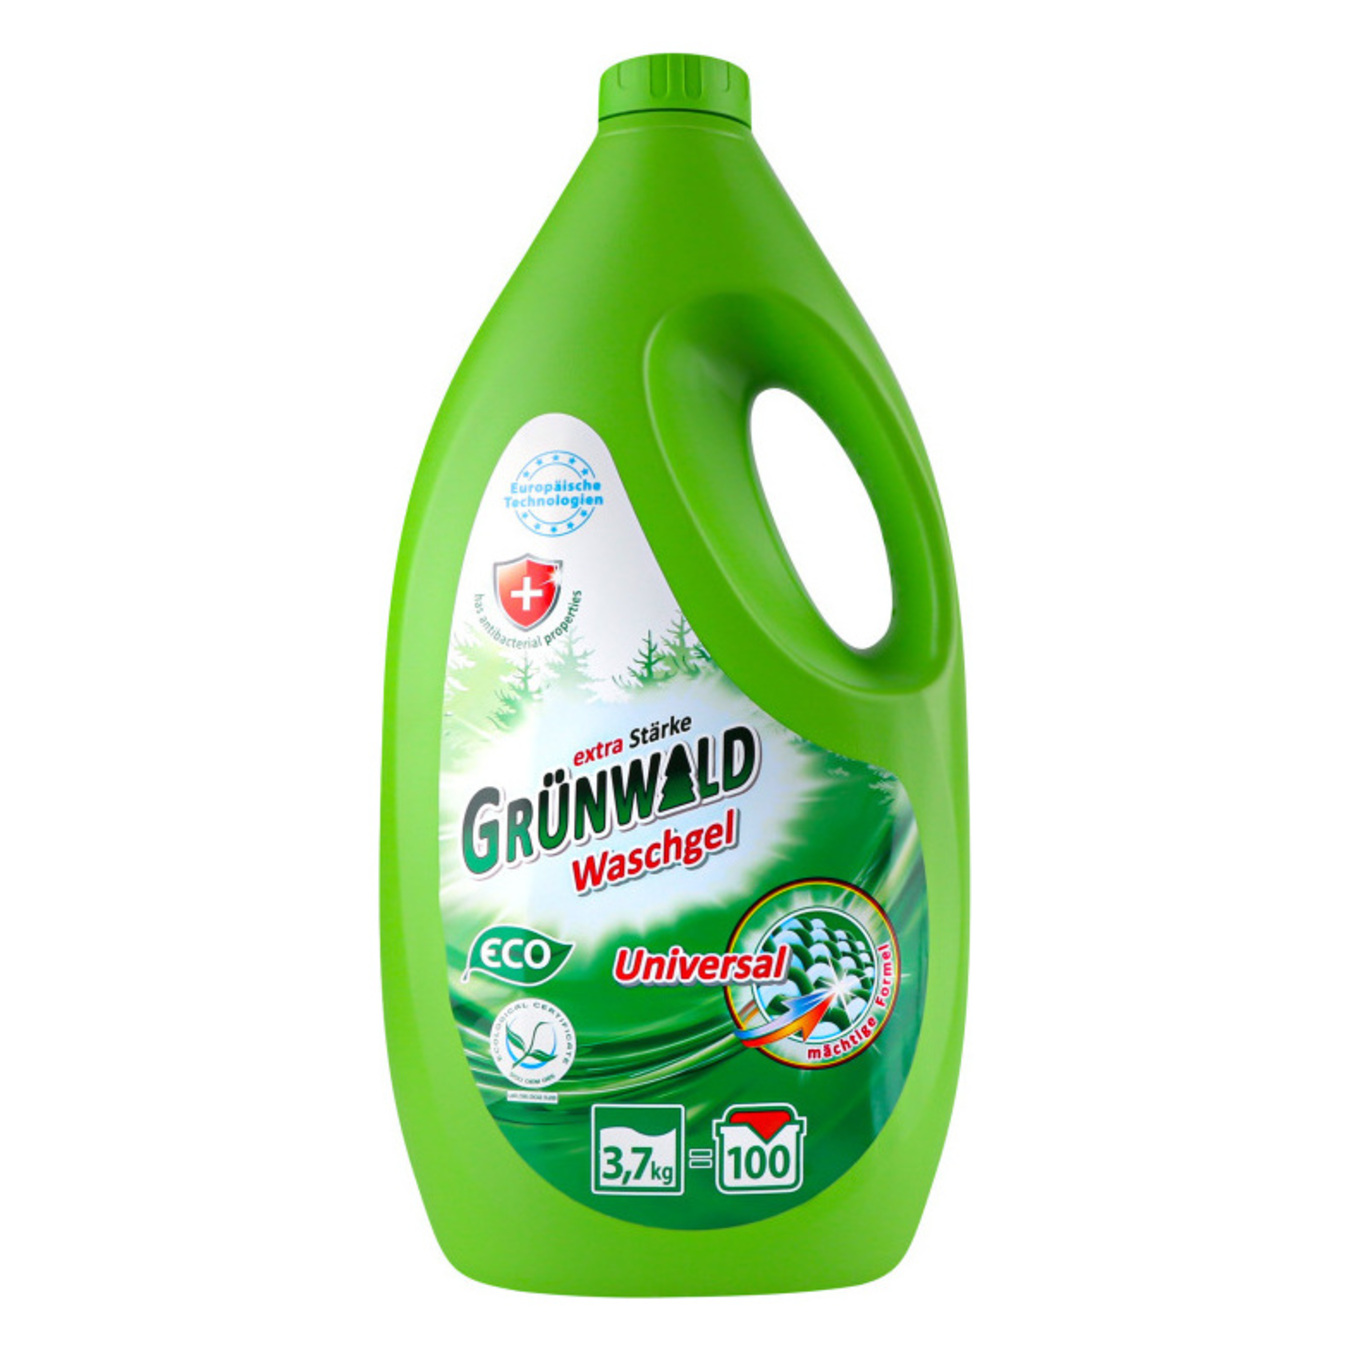 Gel for washing Grünwald colored and white organic laundry 2in1 142 cycles 5l